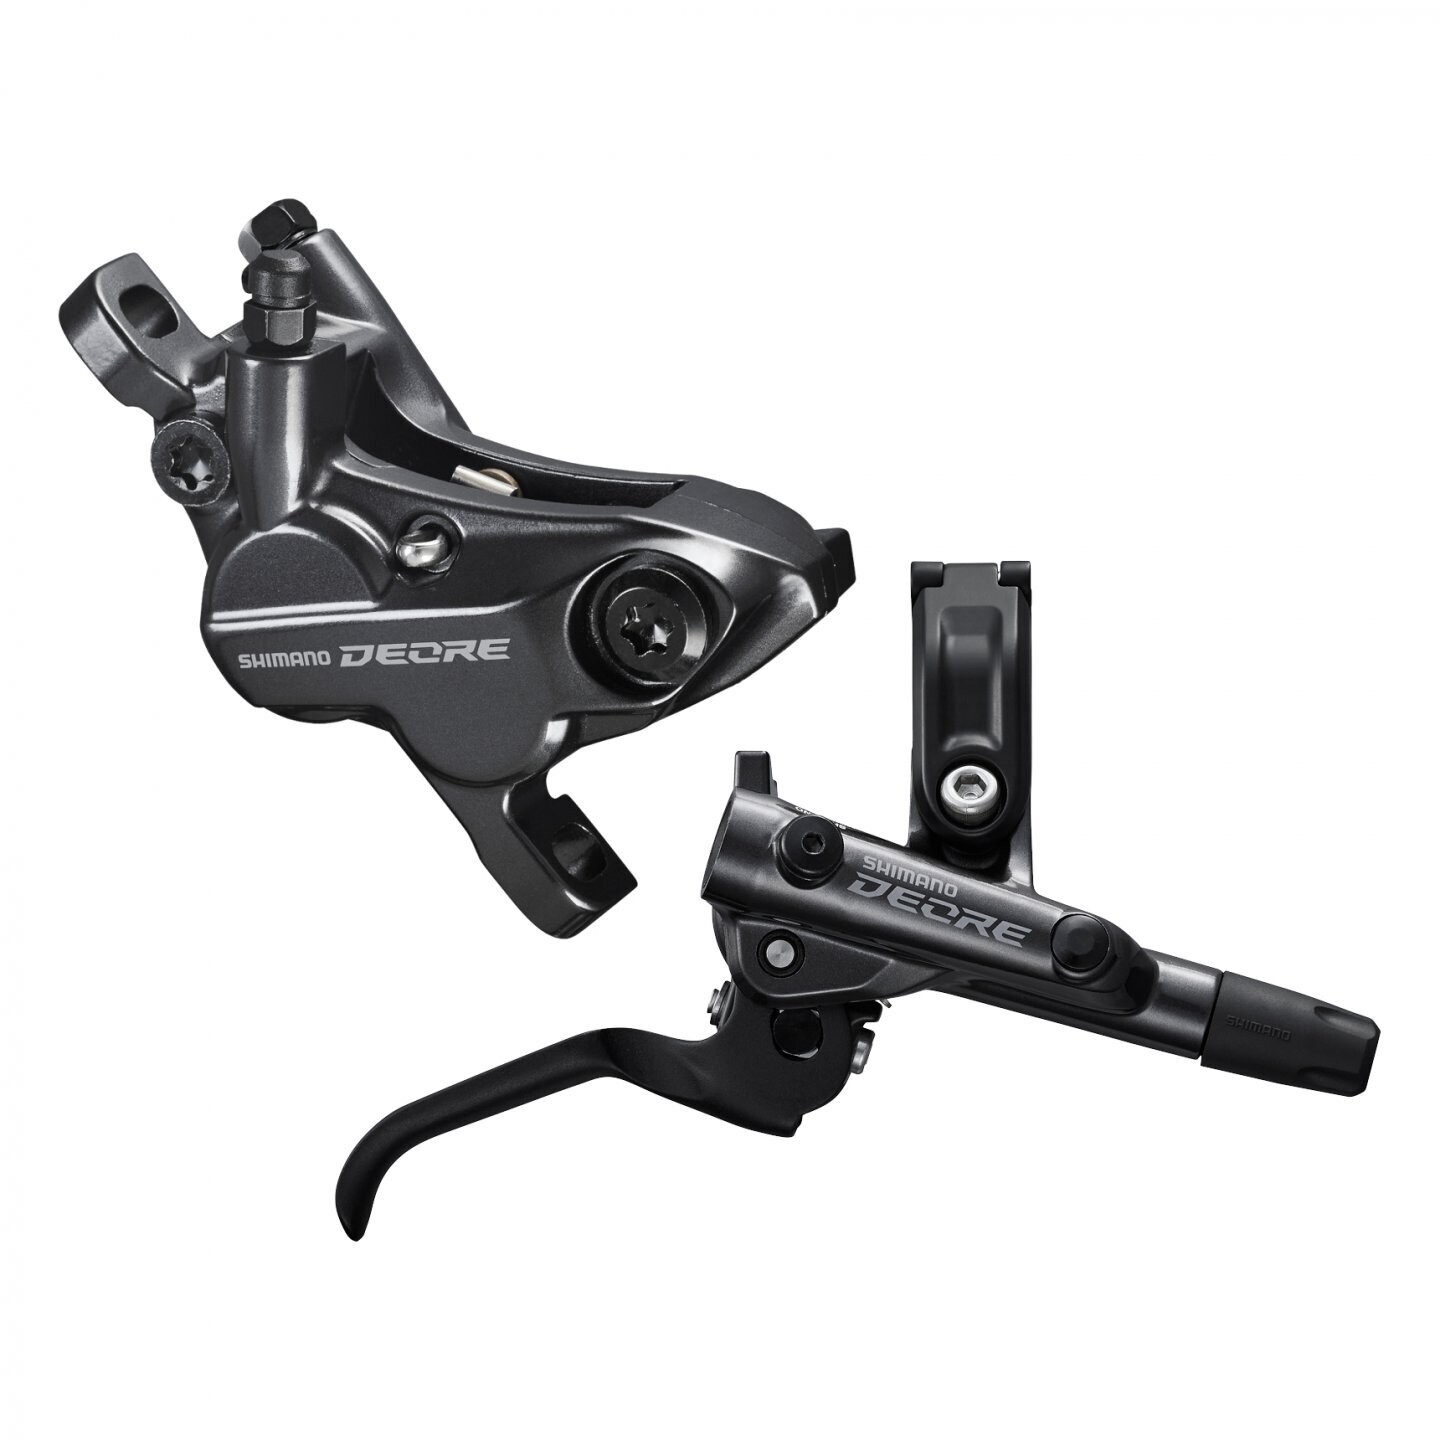 Shimano Deore BL-M6100 + BR-M6120 Hydraulic Disc Brake J-Kit ( Left/front & Right Rear Set)